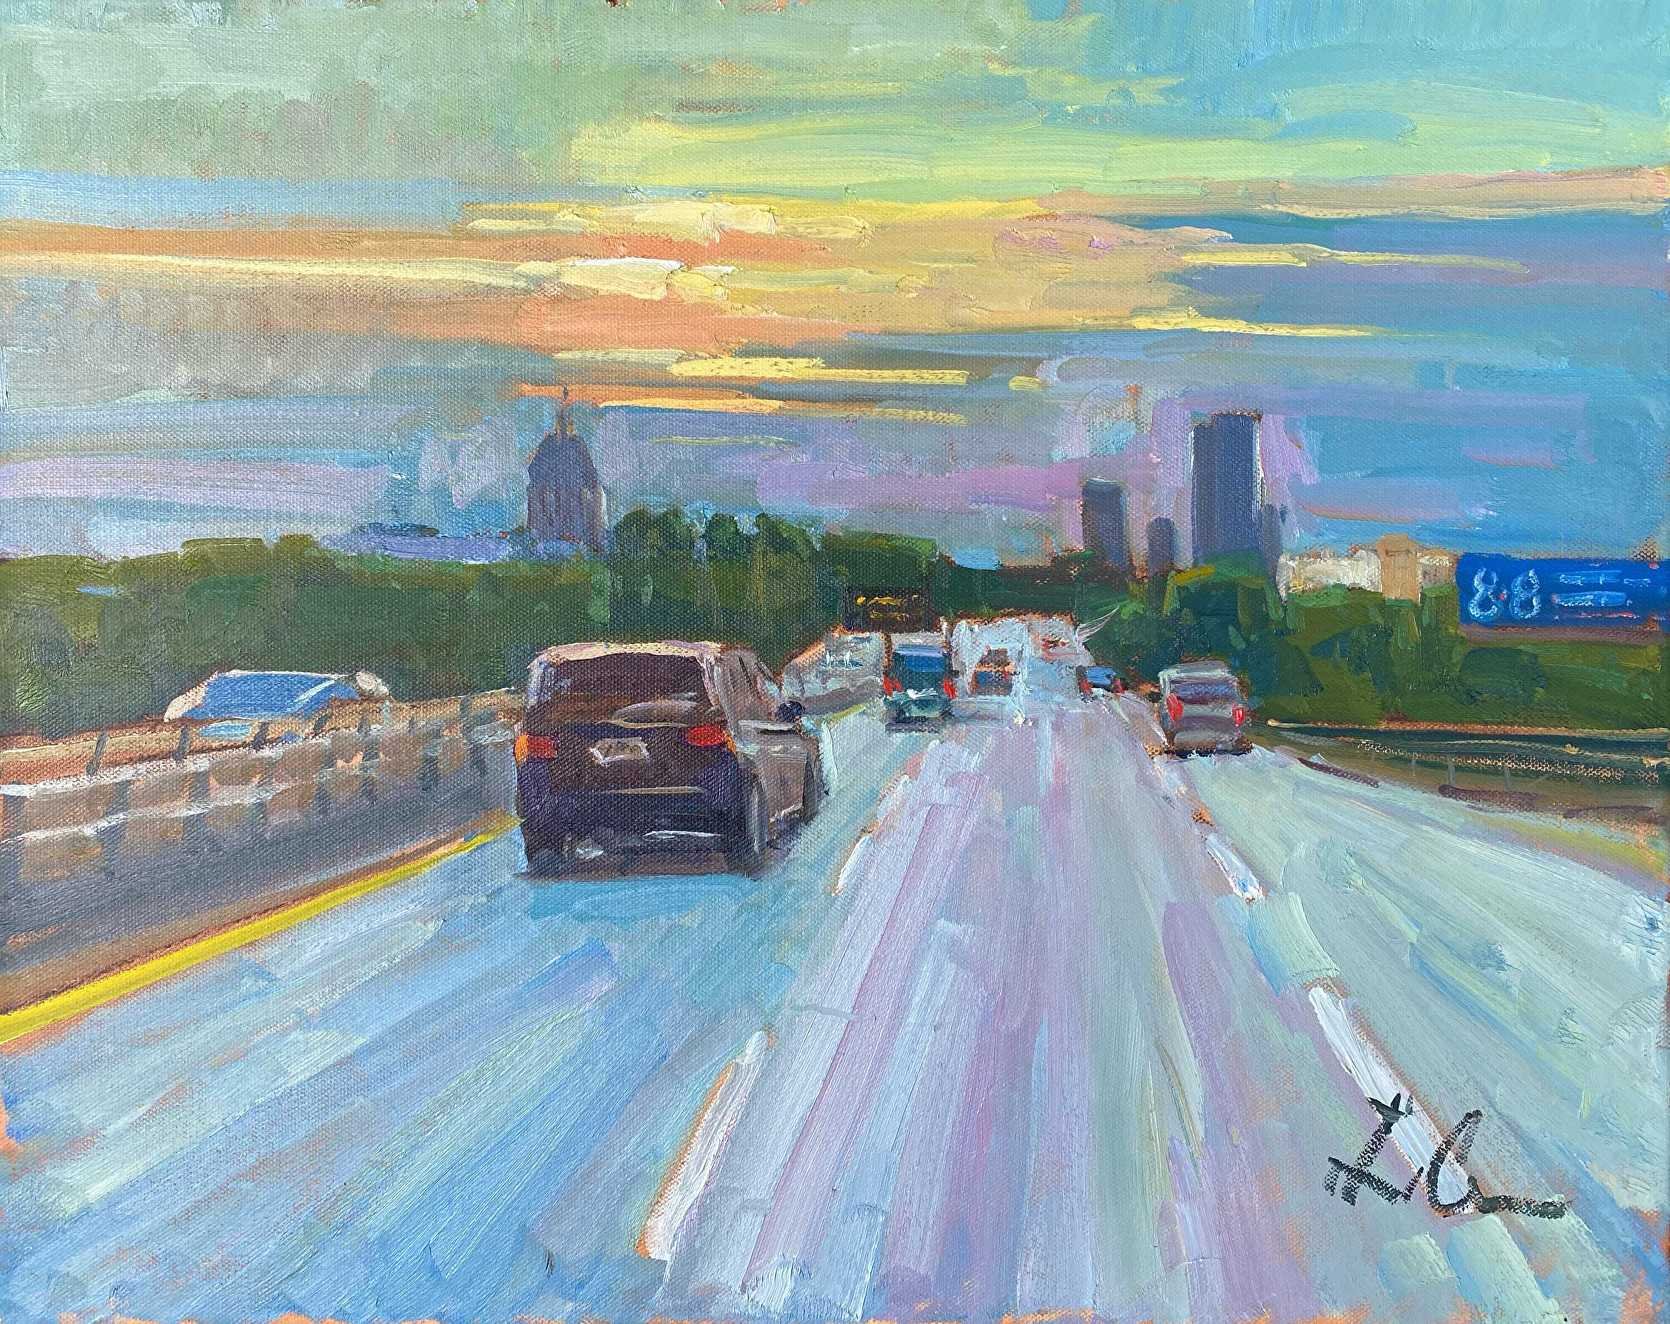    I-630 Morning  , 12” x 16”, oil on canvas 